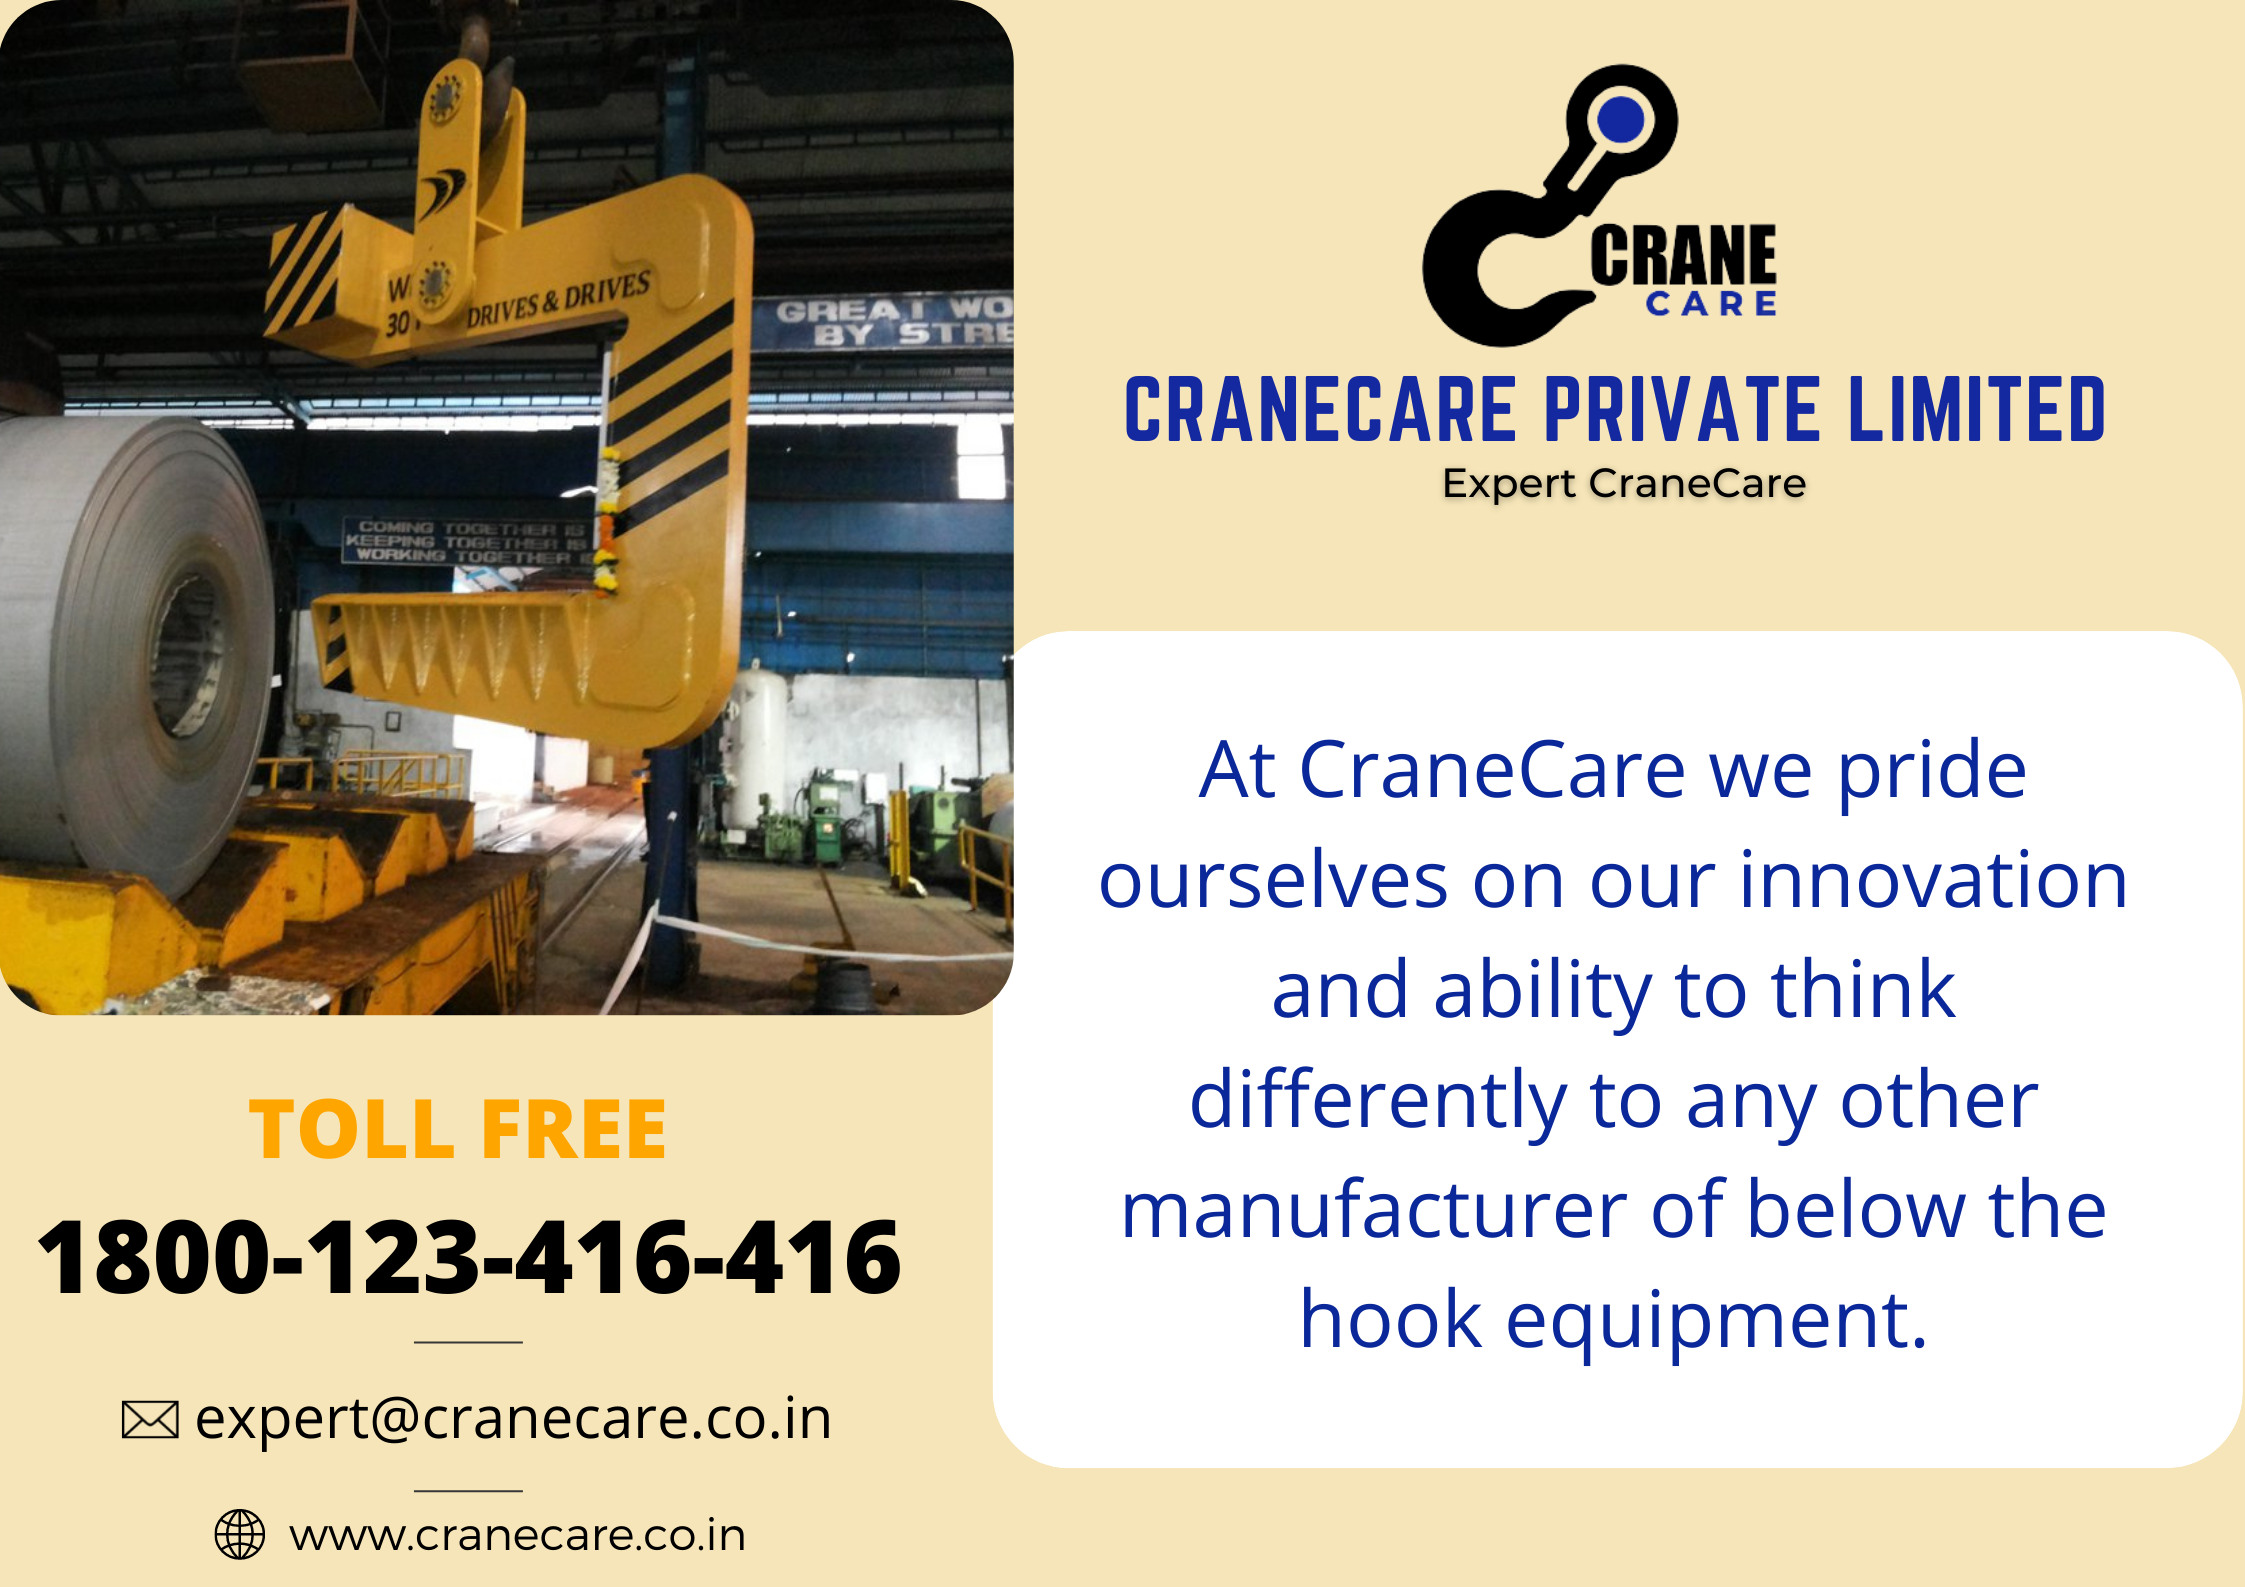 At CraneCare we pride ourselves